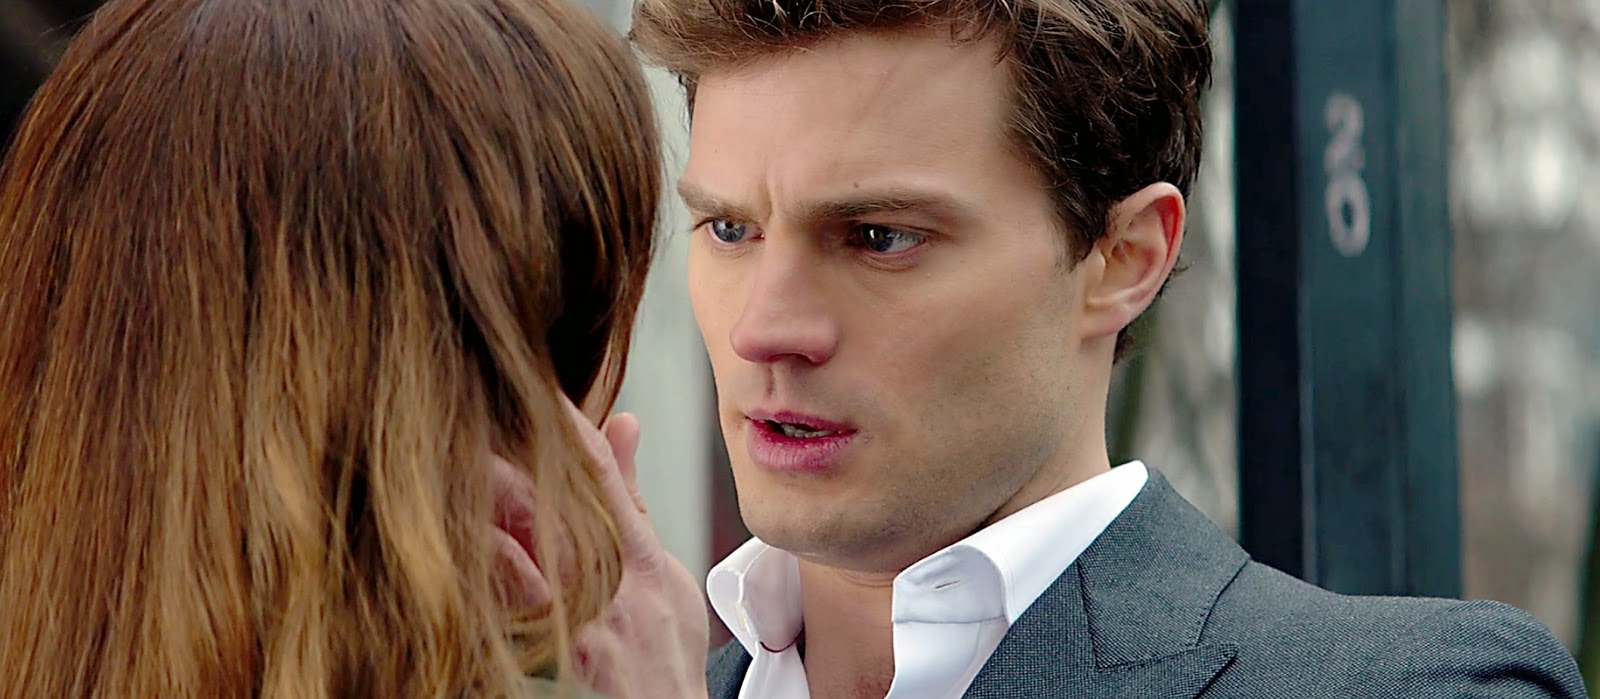 New Hd Stills From Fifty Shades Of Grey Trailer